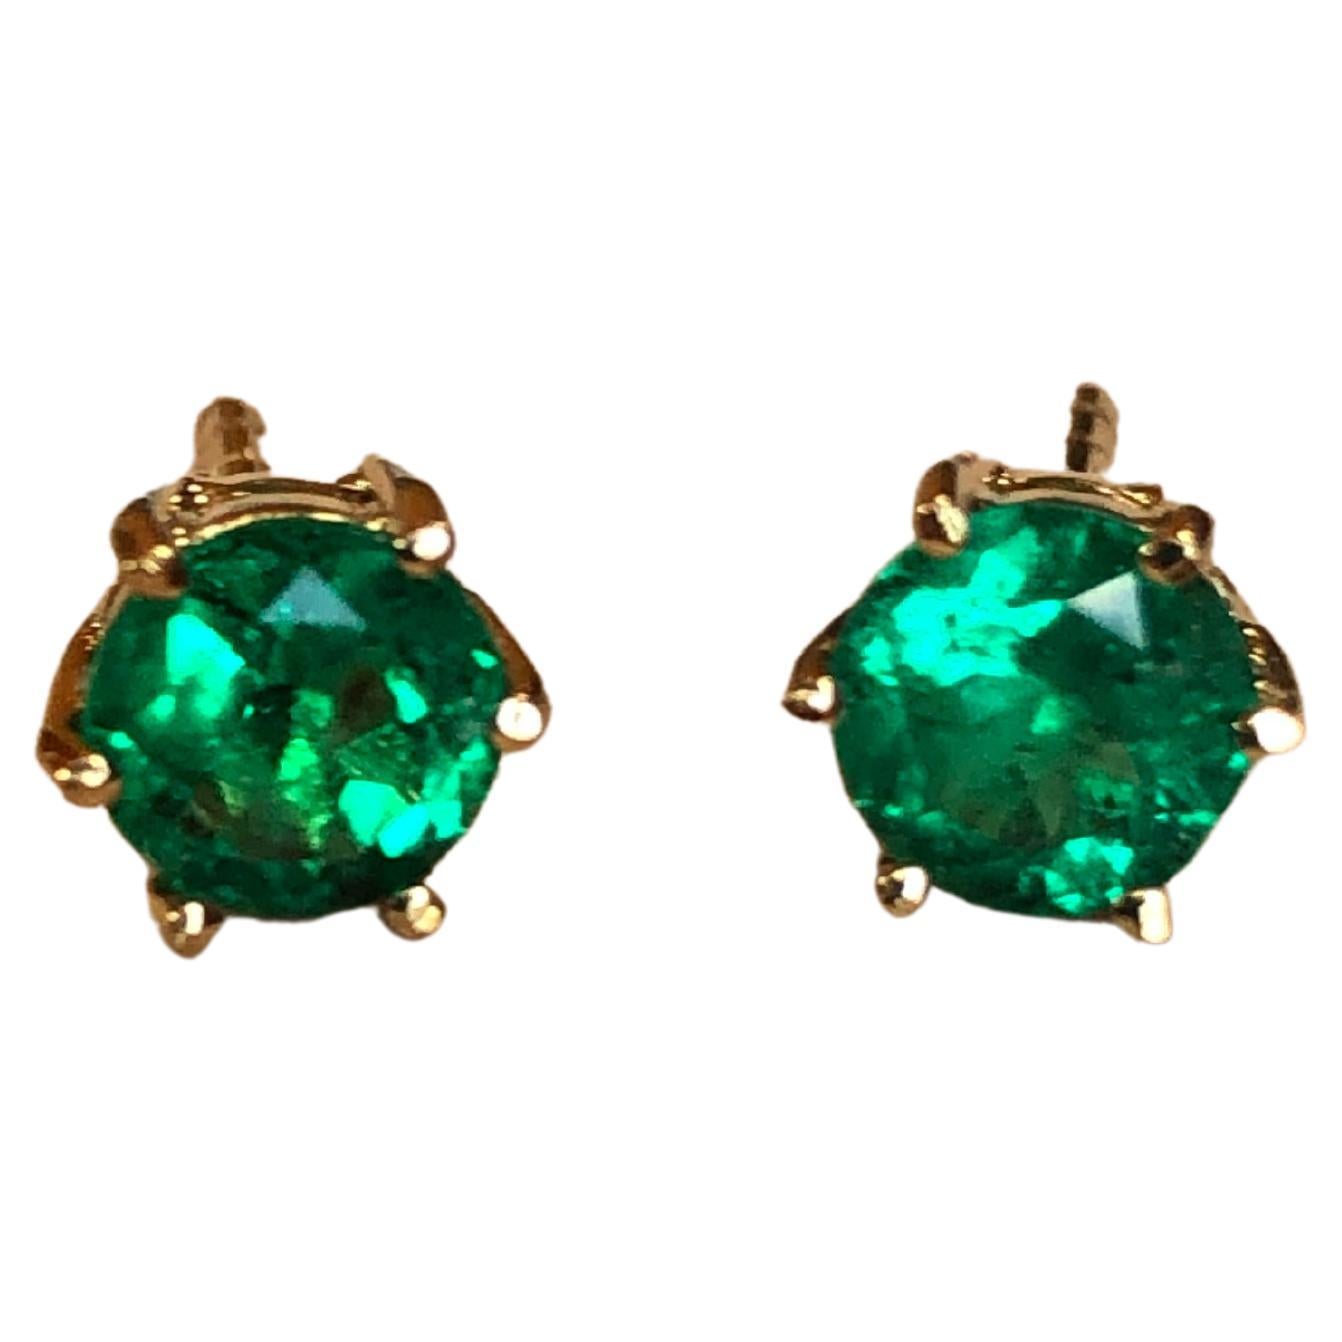 A beautiful fine pair of round-cut AAA Colombian emerald stud earrings set in 18k yellow gold.  Each earring solely features a sparkly green-colored round cut natural Colombian emerald, which is 6 prongs set open back setting.  The earrings measure